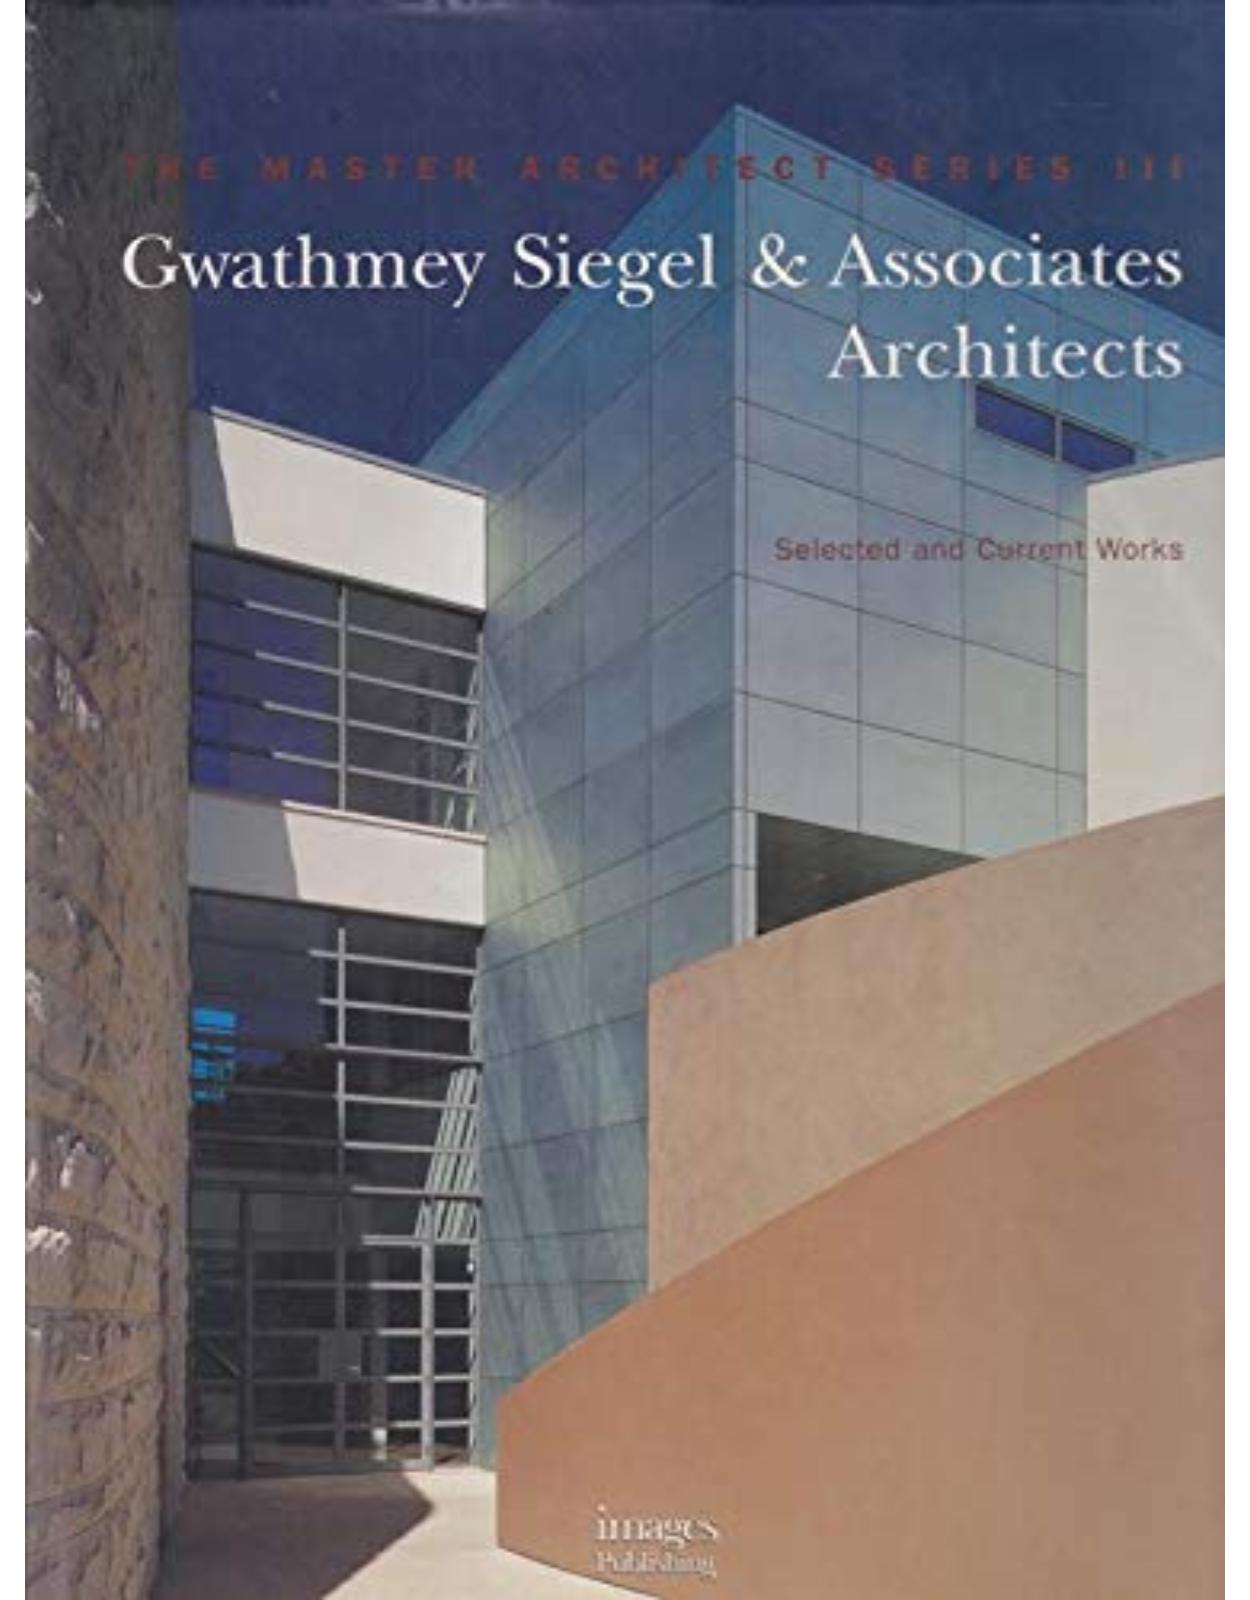 Gwathmey Siegel and Associates Architects: Selected and Current Works (Master Architect Series III)